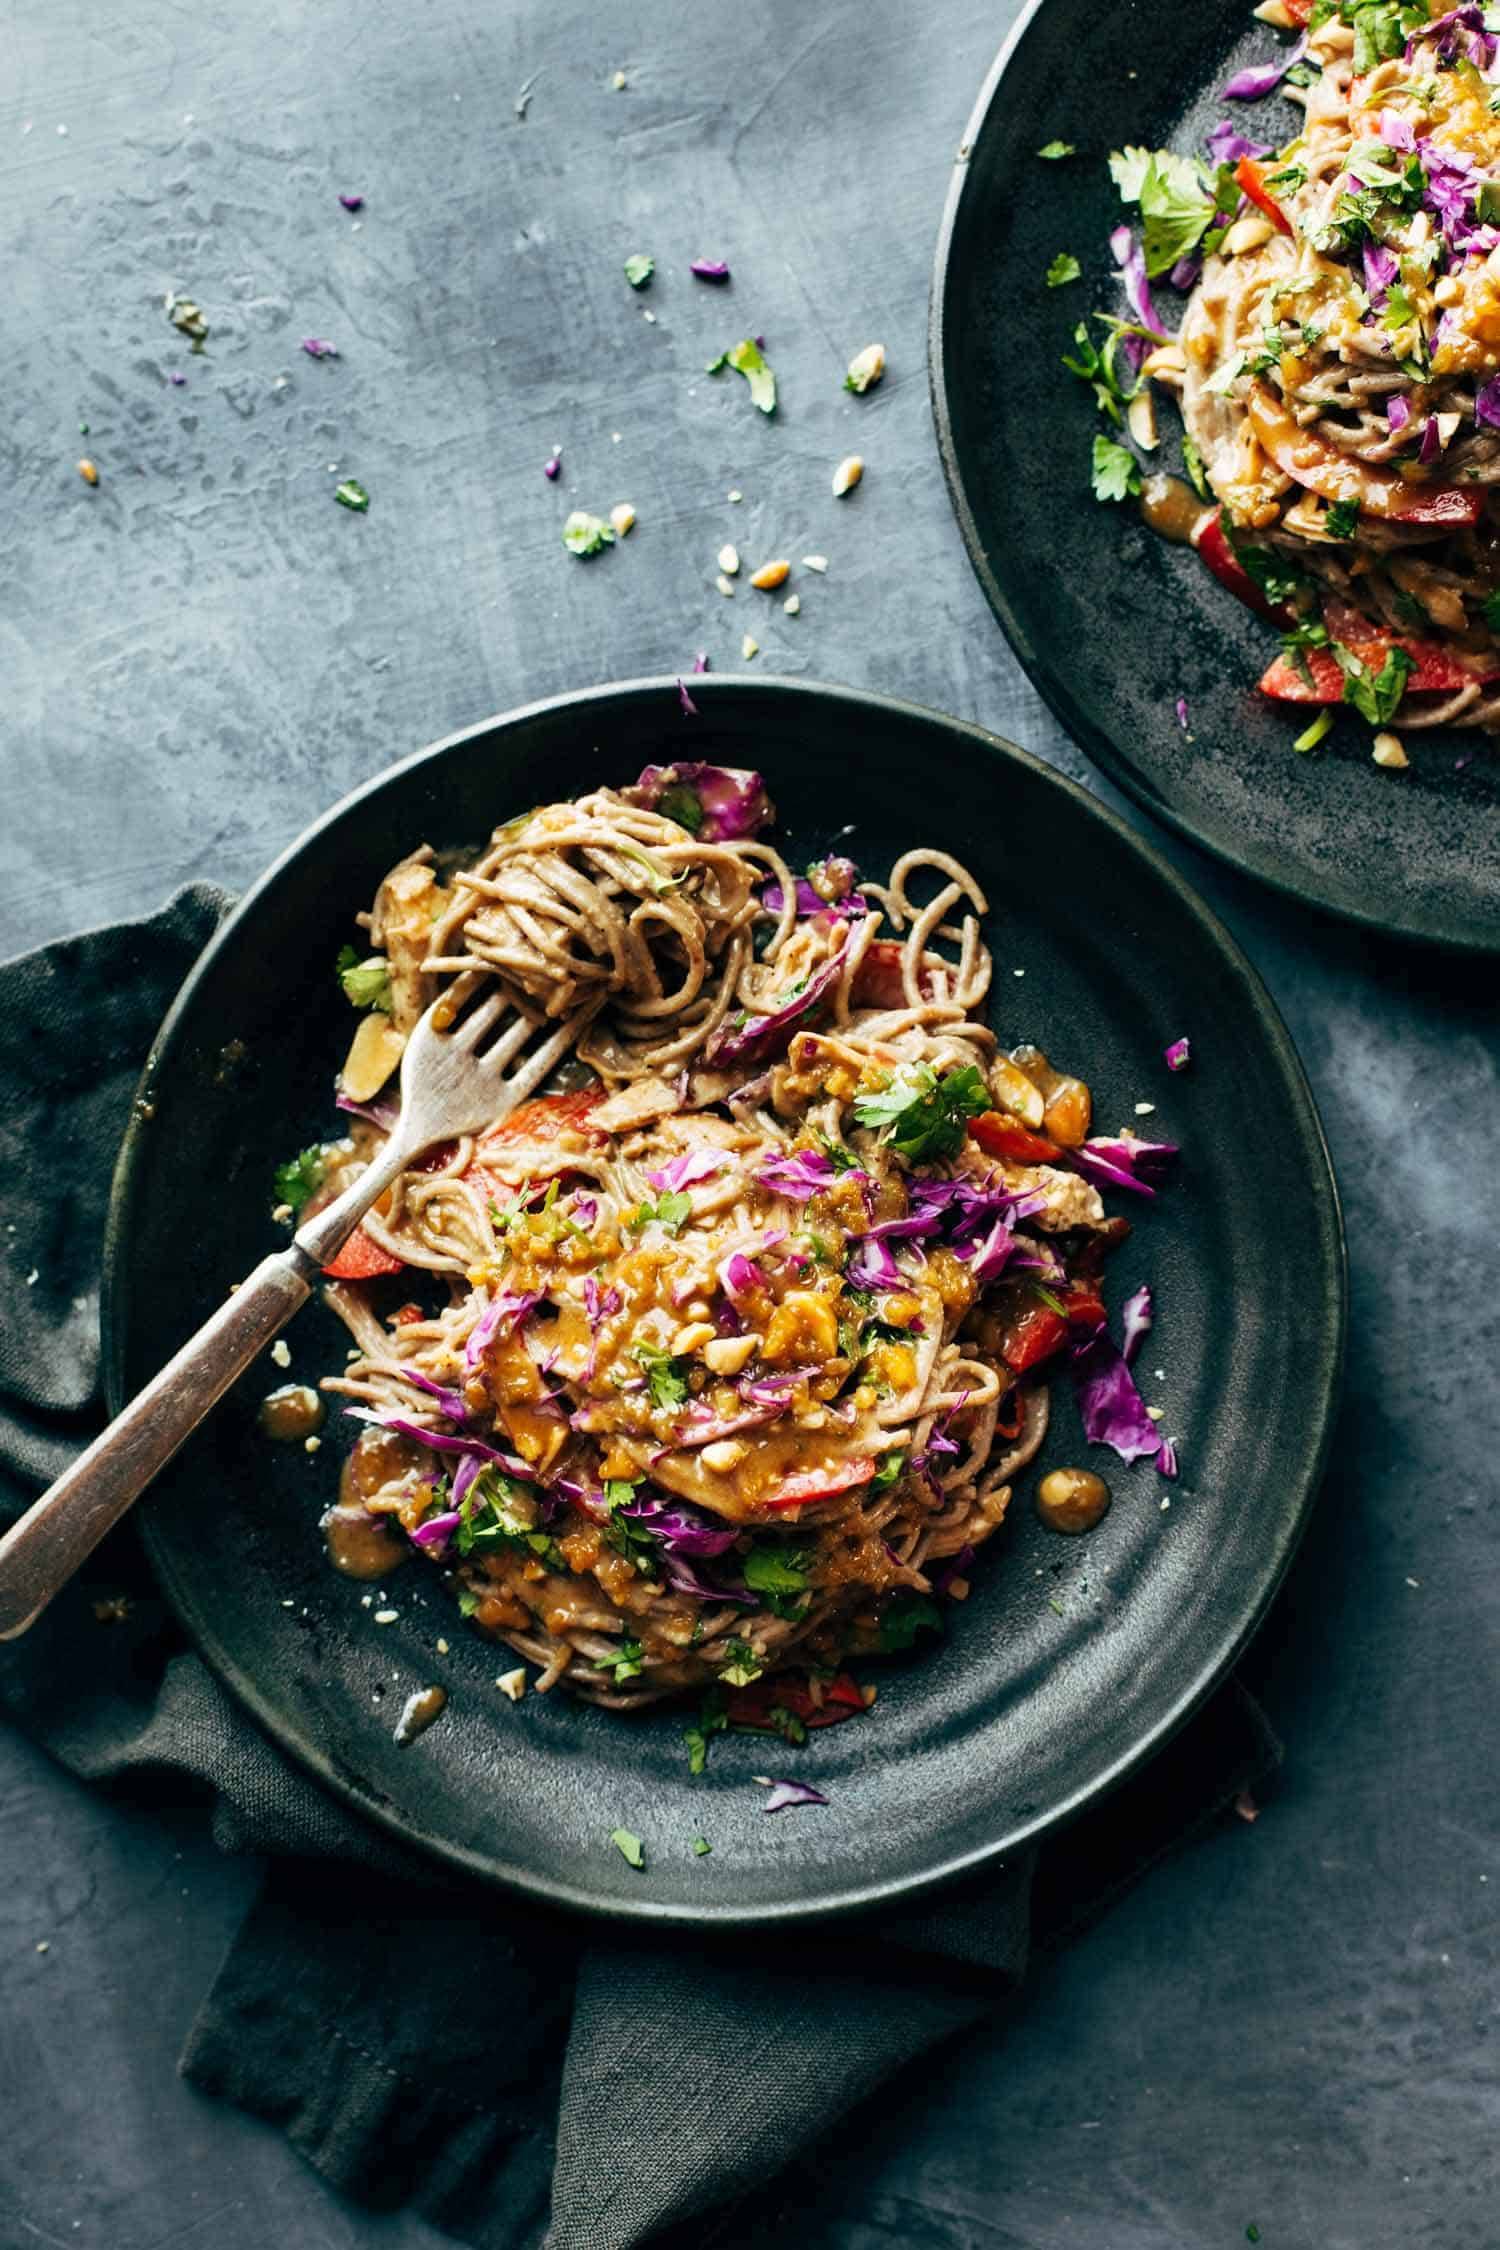 Spicy Peanut Soba Noodle Salad - red peppers, cabbage, chicken, soba noodles, and a quick homemade spicy peanut sauce. salads don't get much yummier than this. gluten free. | pinchofyum.com